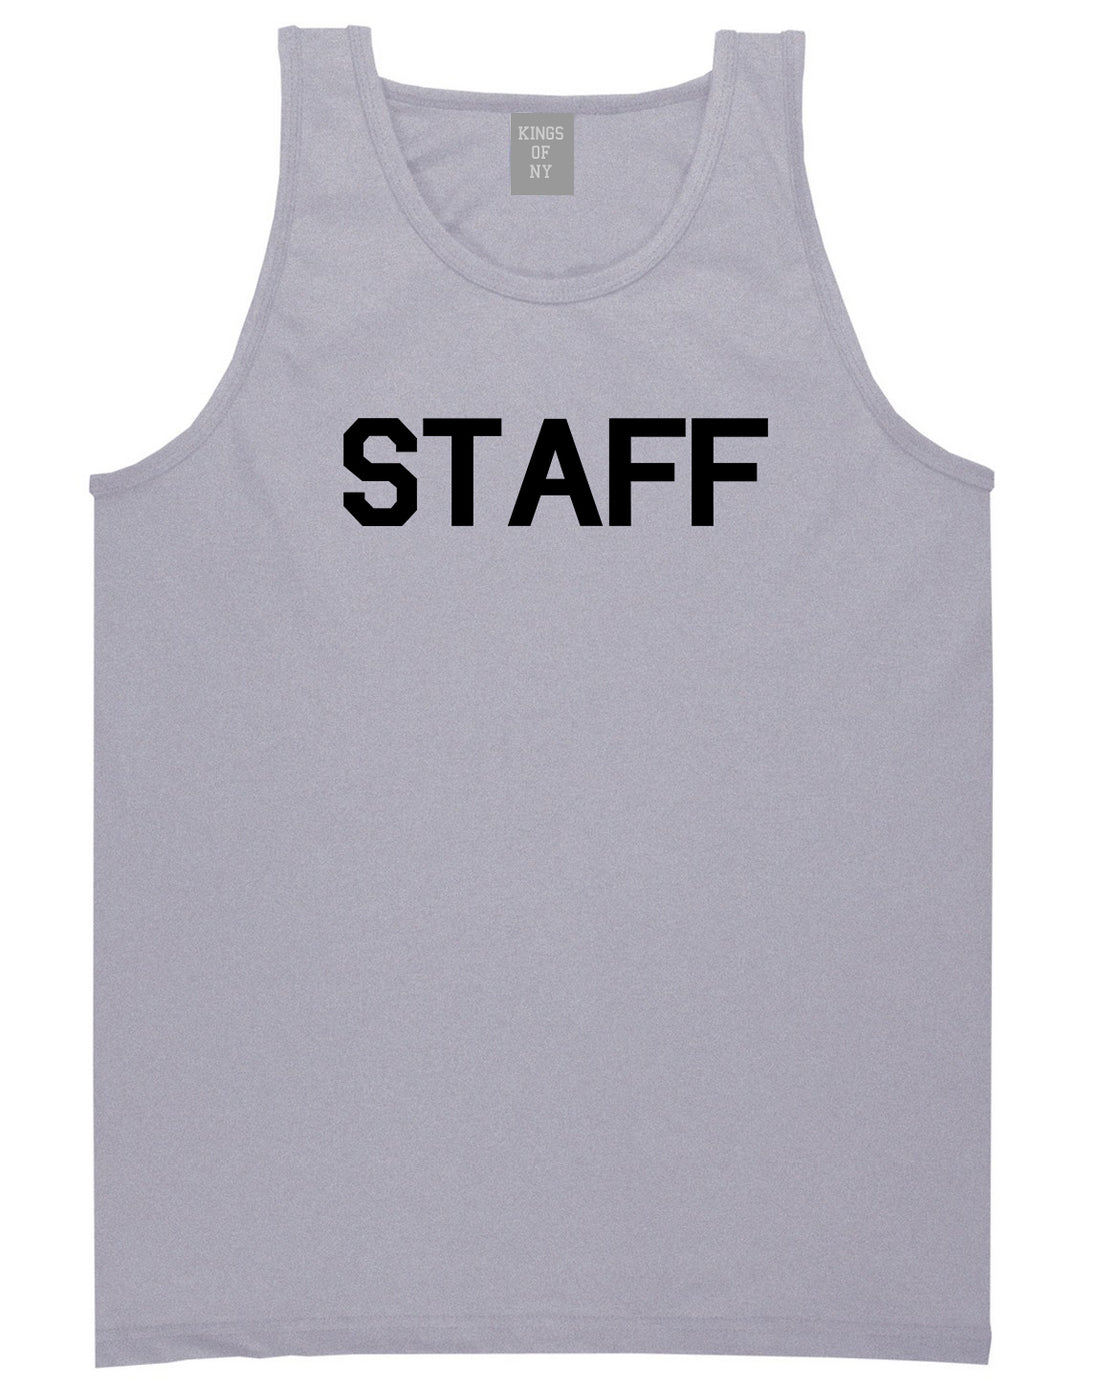 Staff Club Concert Event Mens Grey Tank Top Shirt by KINGS OF NY